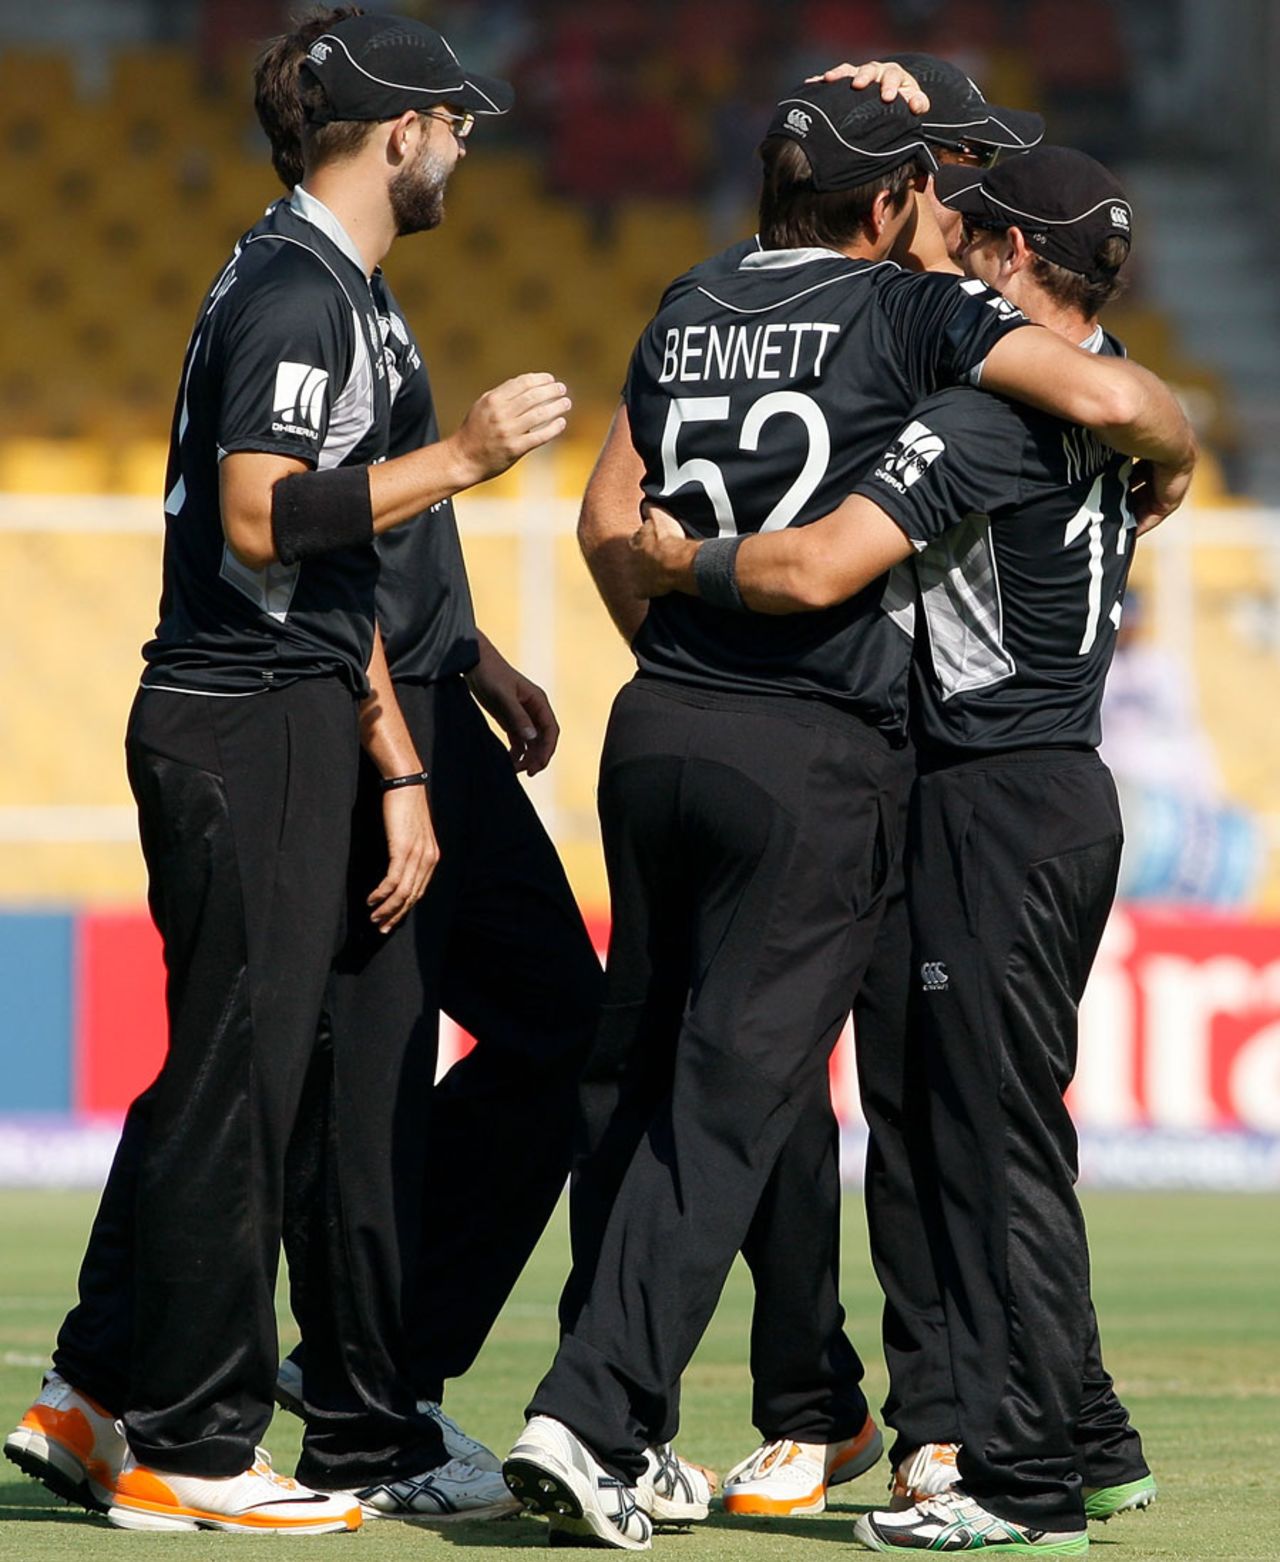 New Zealand celebrate after Charles Coventry's run out, New Zealand v Zimbabwe, Group A, World Cup 2011, Motera, March 4, 2011